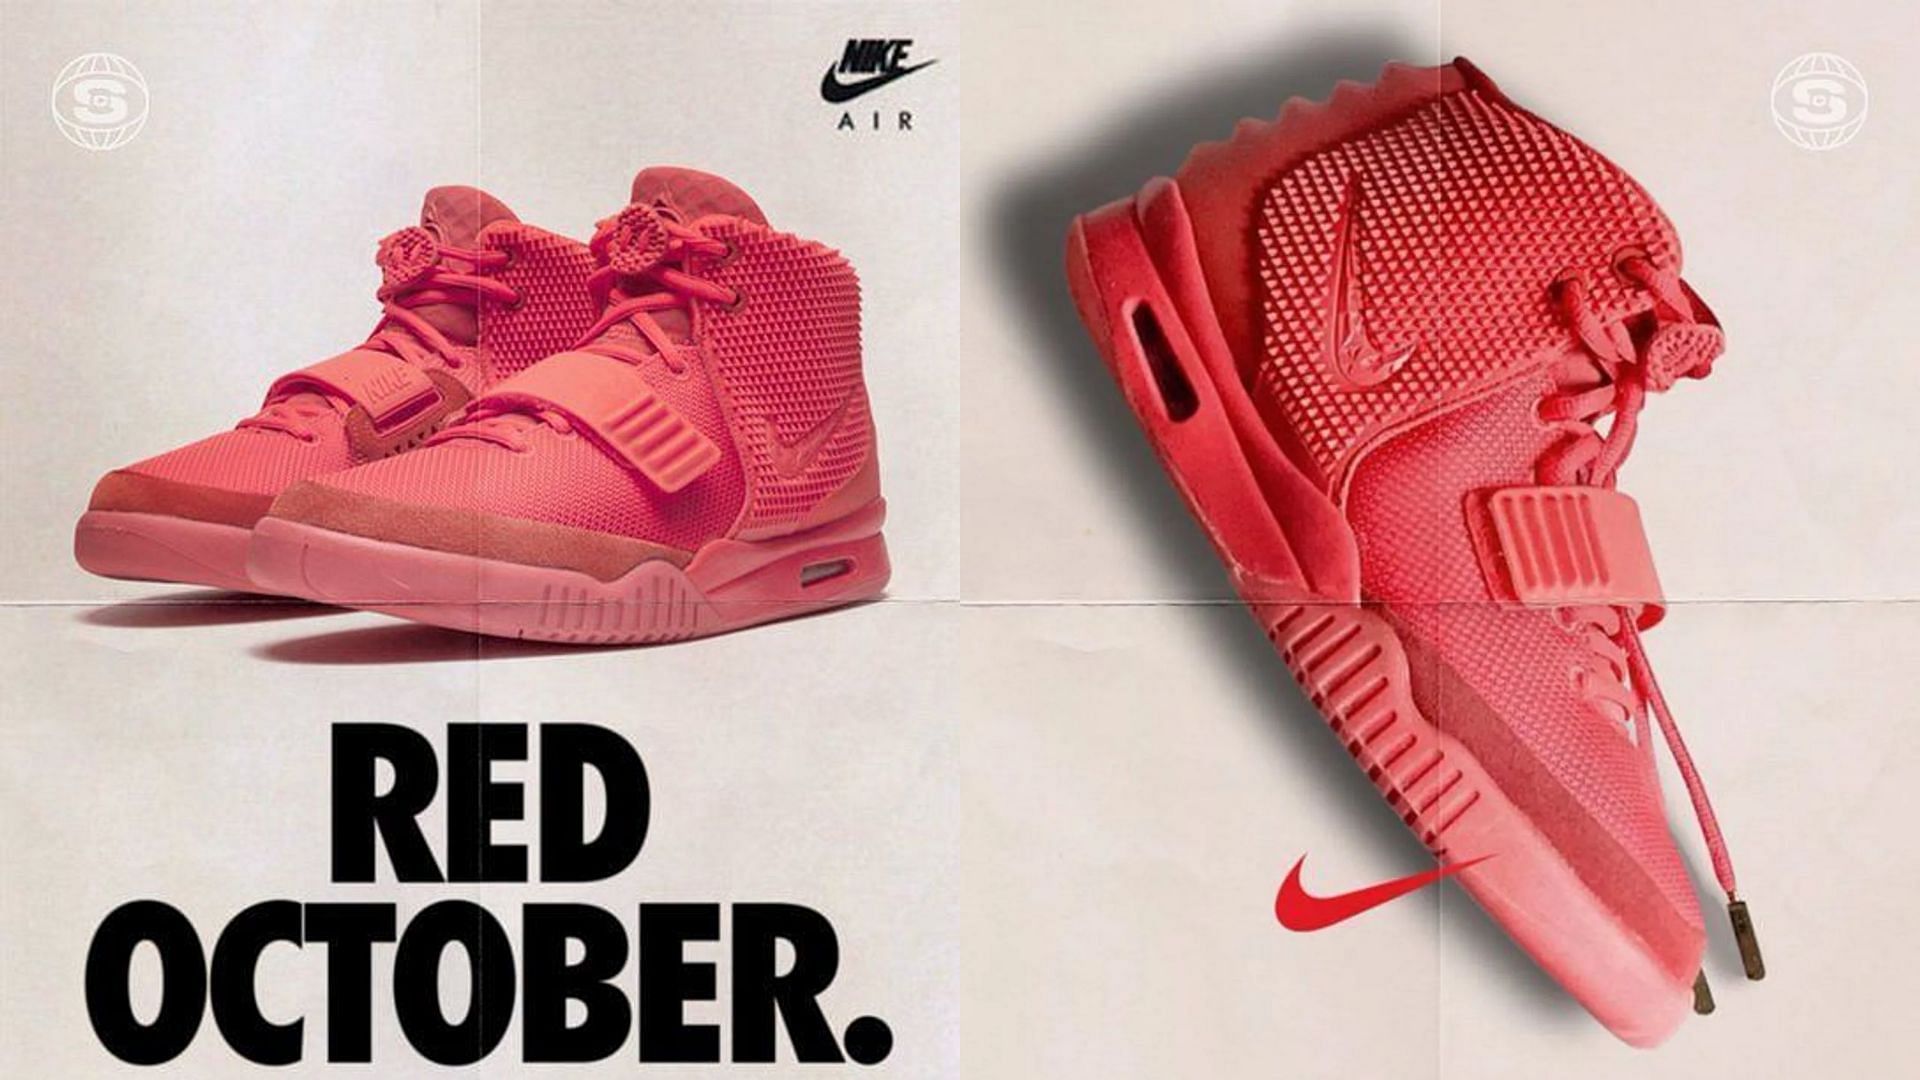 A Power Ranking of Rapper Sneaker Collaborations